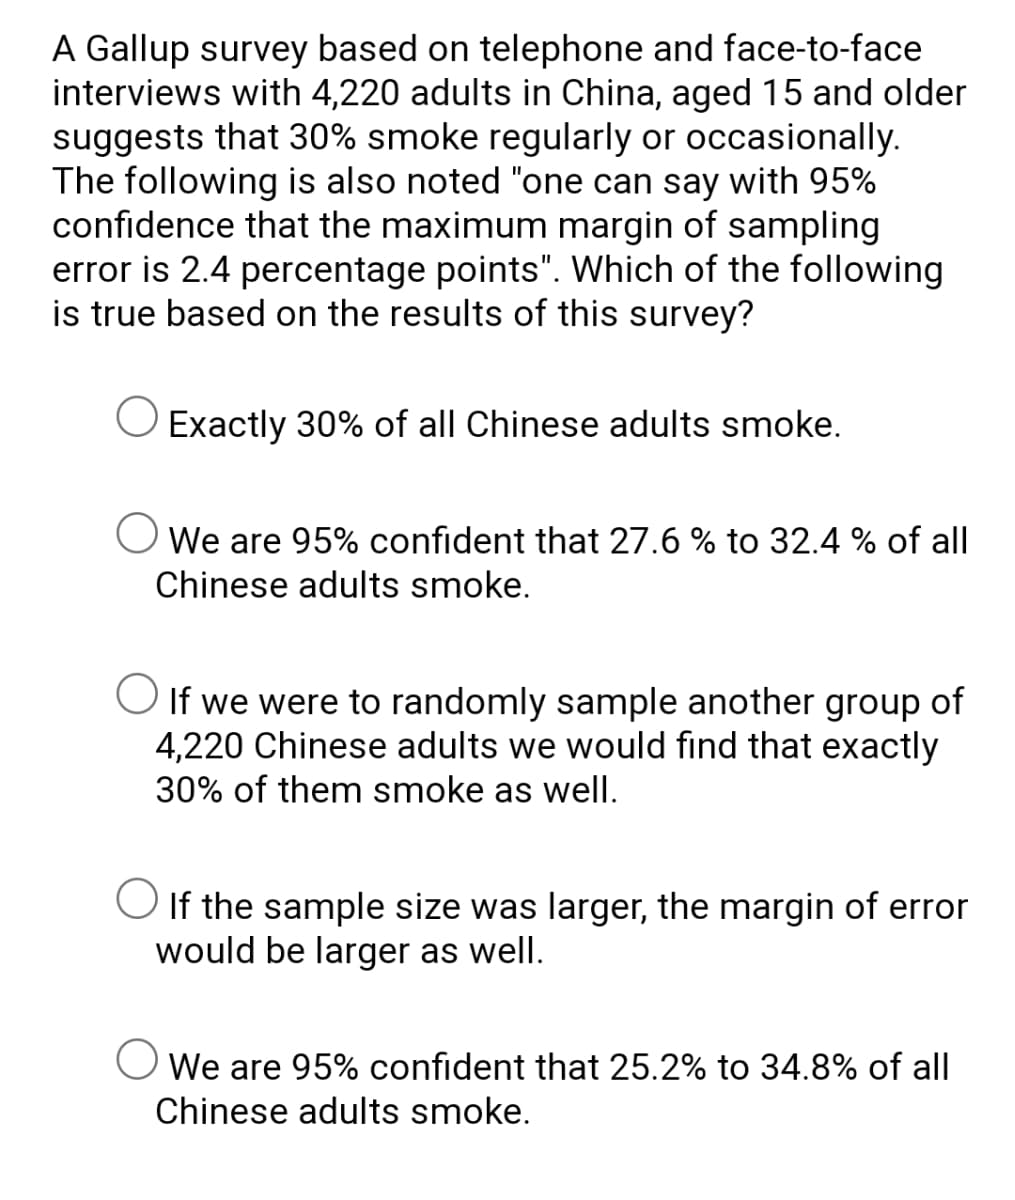 A Gallup survey based on telephone and face-to-face
interviews with 4,220 adults in China, aged 15 and older
suggests that 30% smoke regularly or occasionally.
The following is also noted "one can say with 95%
confidence that the maximum margin of sampling
error is 2.4 percentage points". Which of the following
is true based on the results of this survey?
Exactly 30% of all Chinese adults smoke.
O We are 95% confident that 27.6 % to 32.4 % of all
Chinese adults smoke.
O If we were to randomly sample another group of
4,220 Chinese adults we would find that exactly
30% of them smoke as well.
O If the sample size was larger, the margin of error
would be larger as well.
O We are 95% confident that 25.2% to 34.8% of all
Chinese adults smoke.
